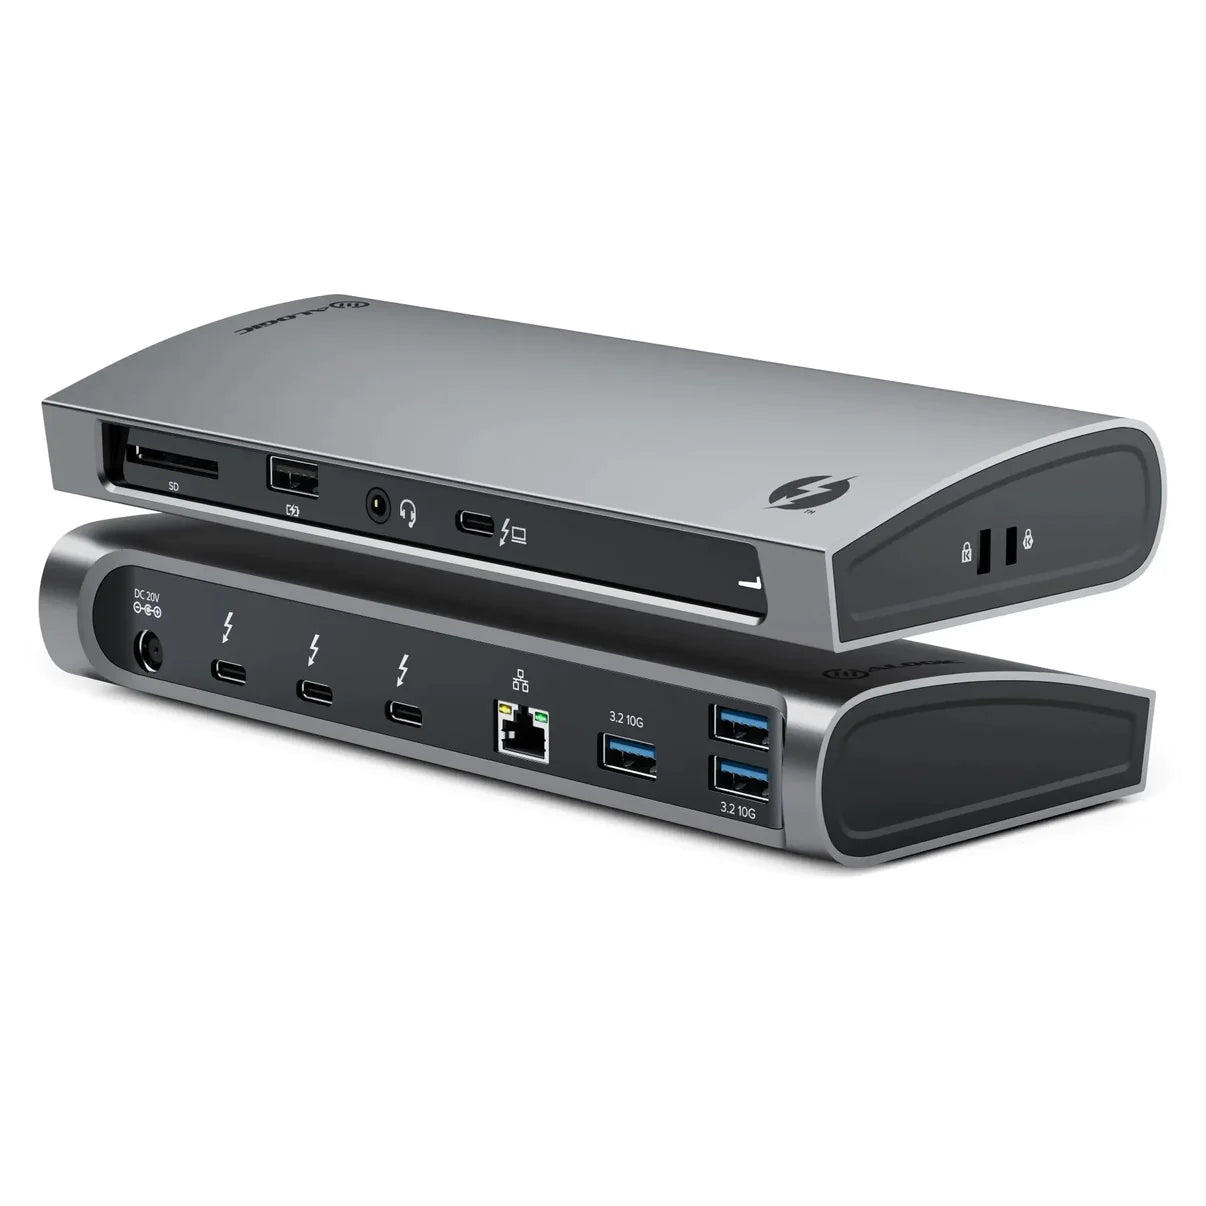 clarity-pro-27-uhd-4k-monitor-with-65w-pd-and-webcam-thunderbolt-4-blaze-docking-station6